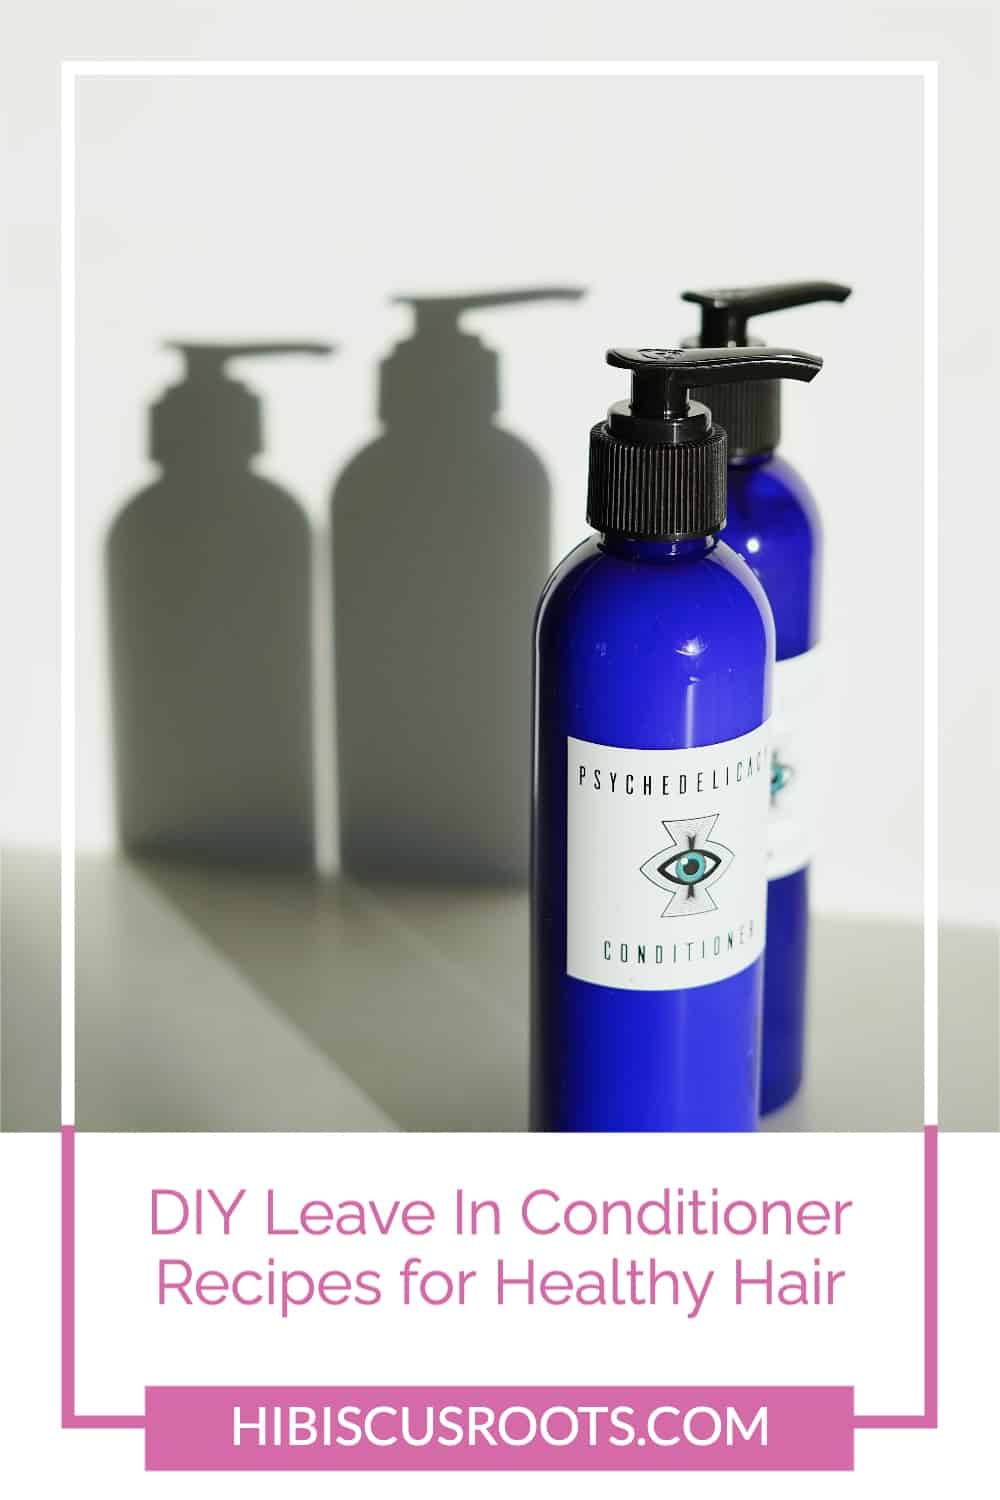 8 Leave-In Conditioner DIY Recipes for Healthy & Shiny Hair!